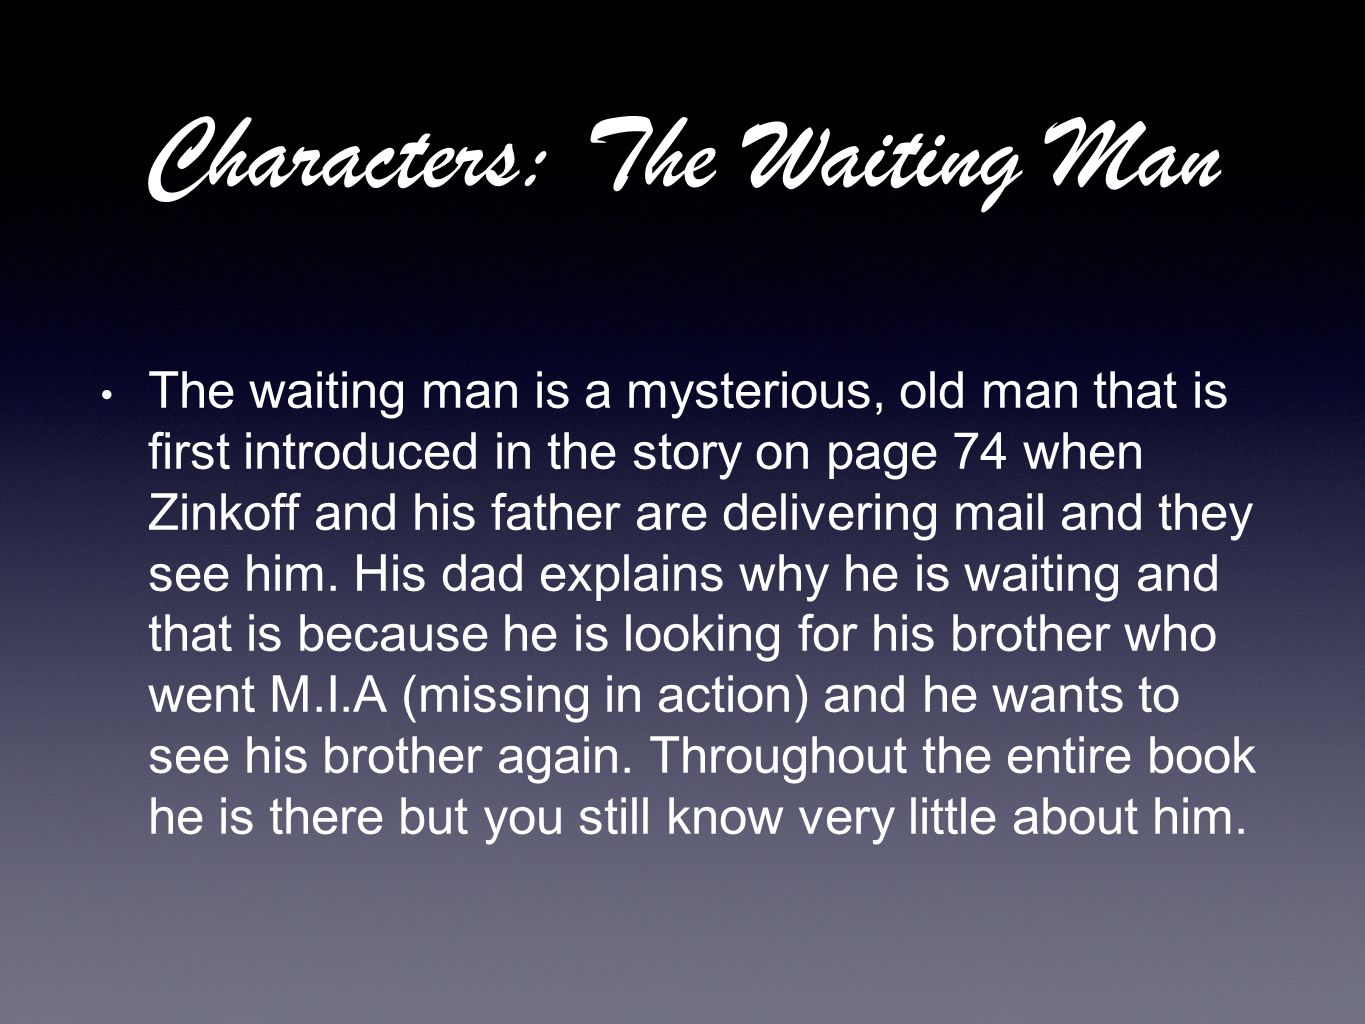 Characters: The Waiting Man